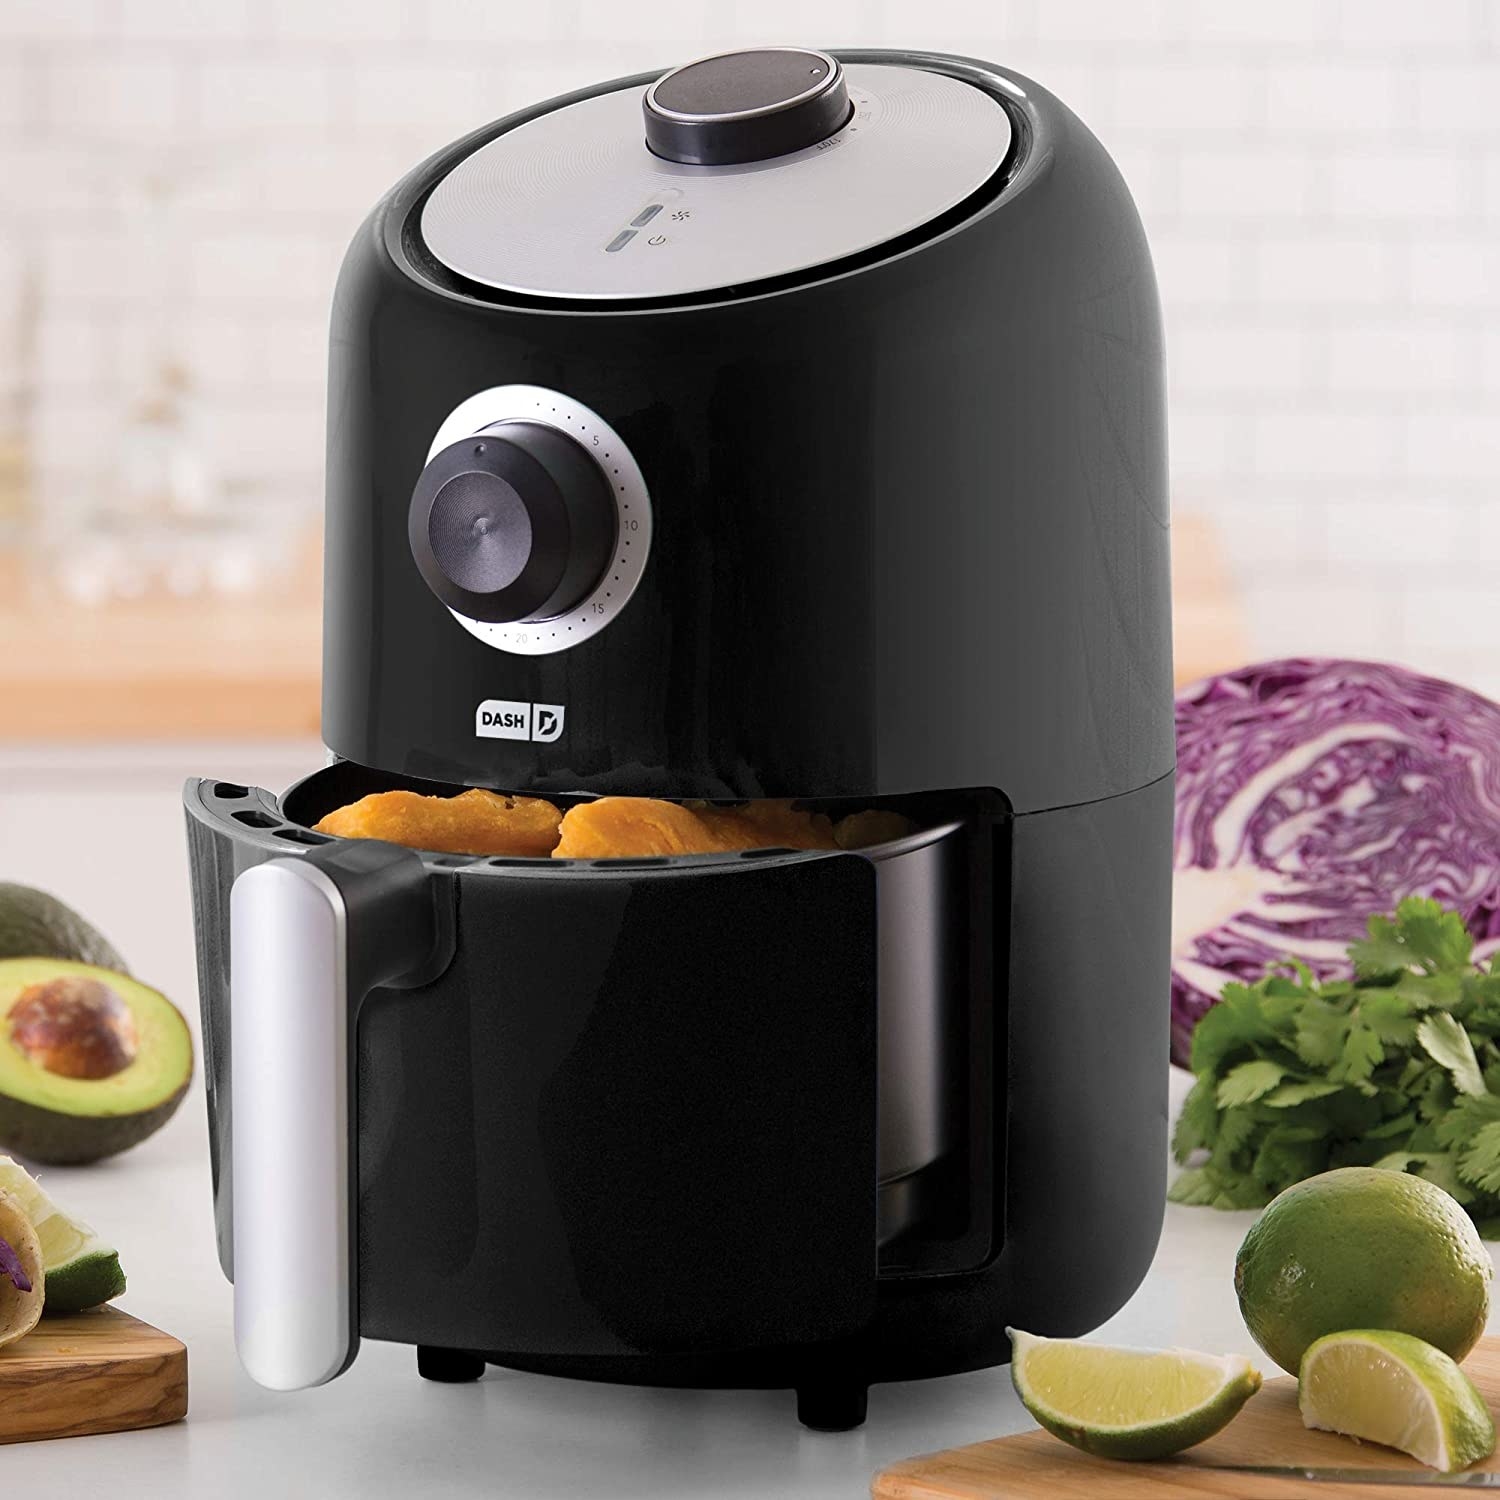 The air fryer in black, featuring an analog timer, round temperature dial, and convenient handle for removing the basket